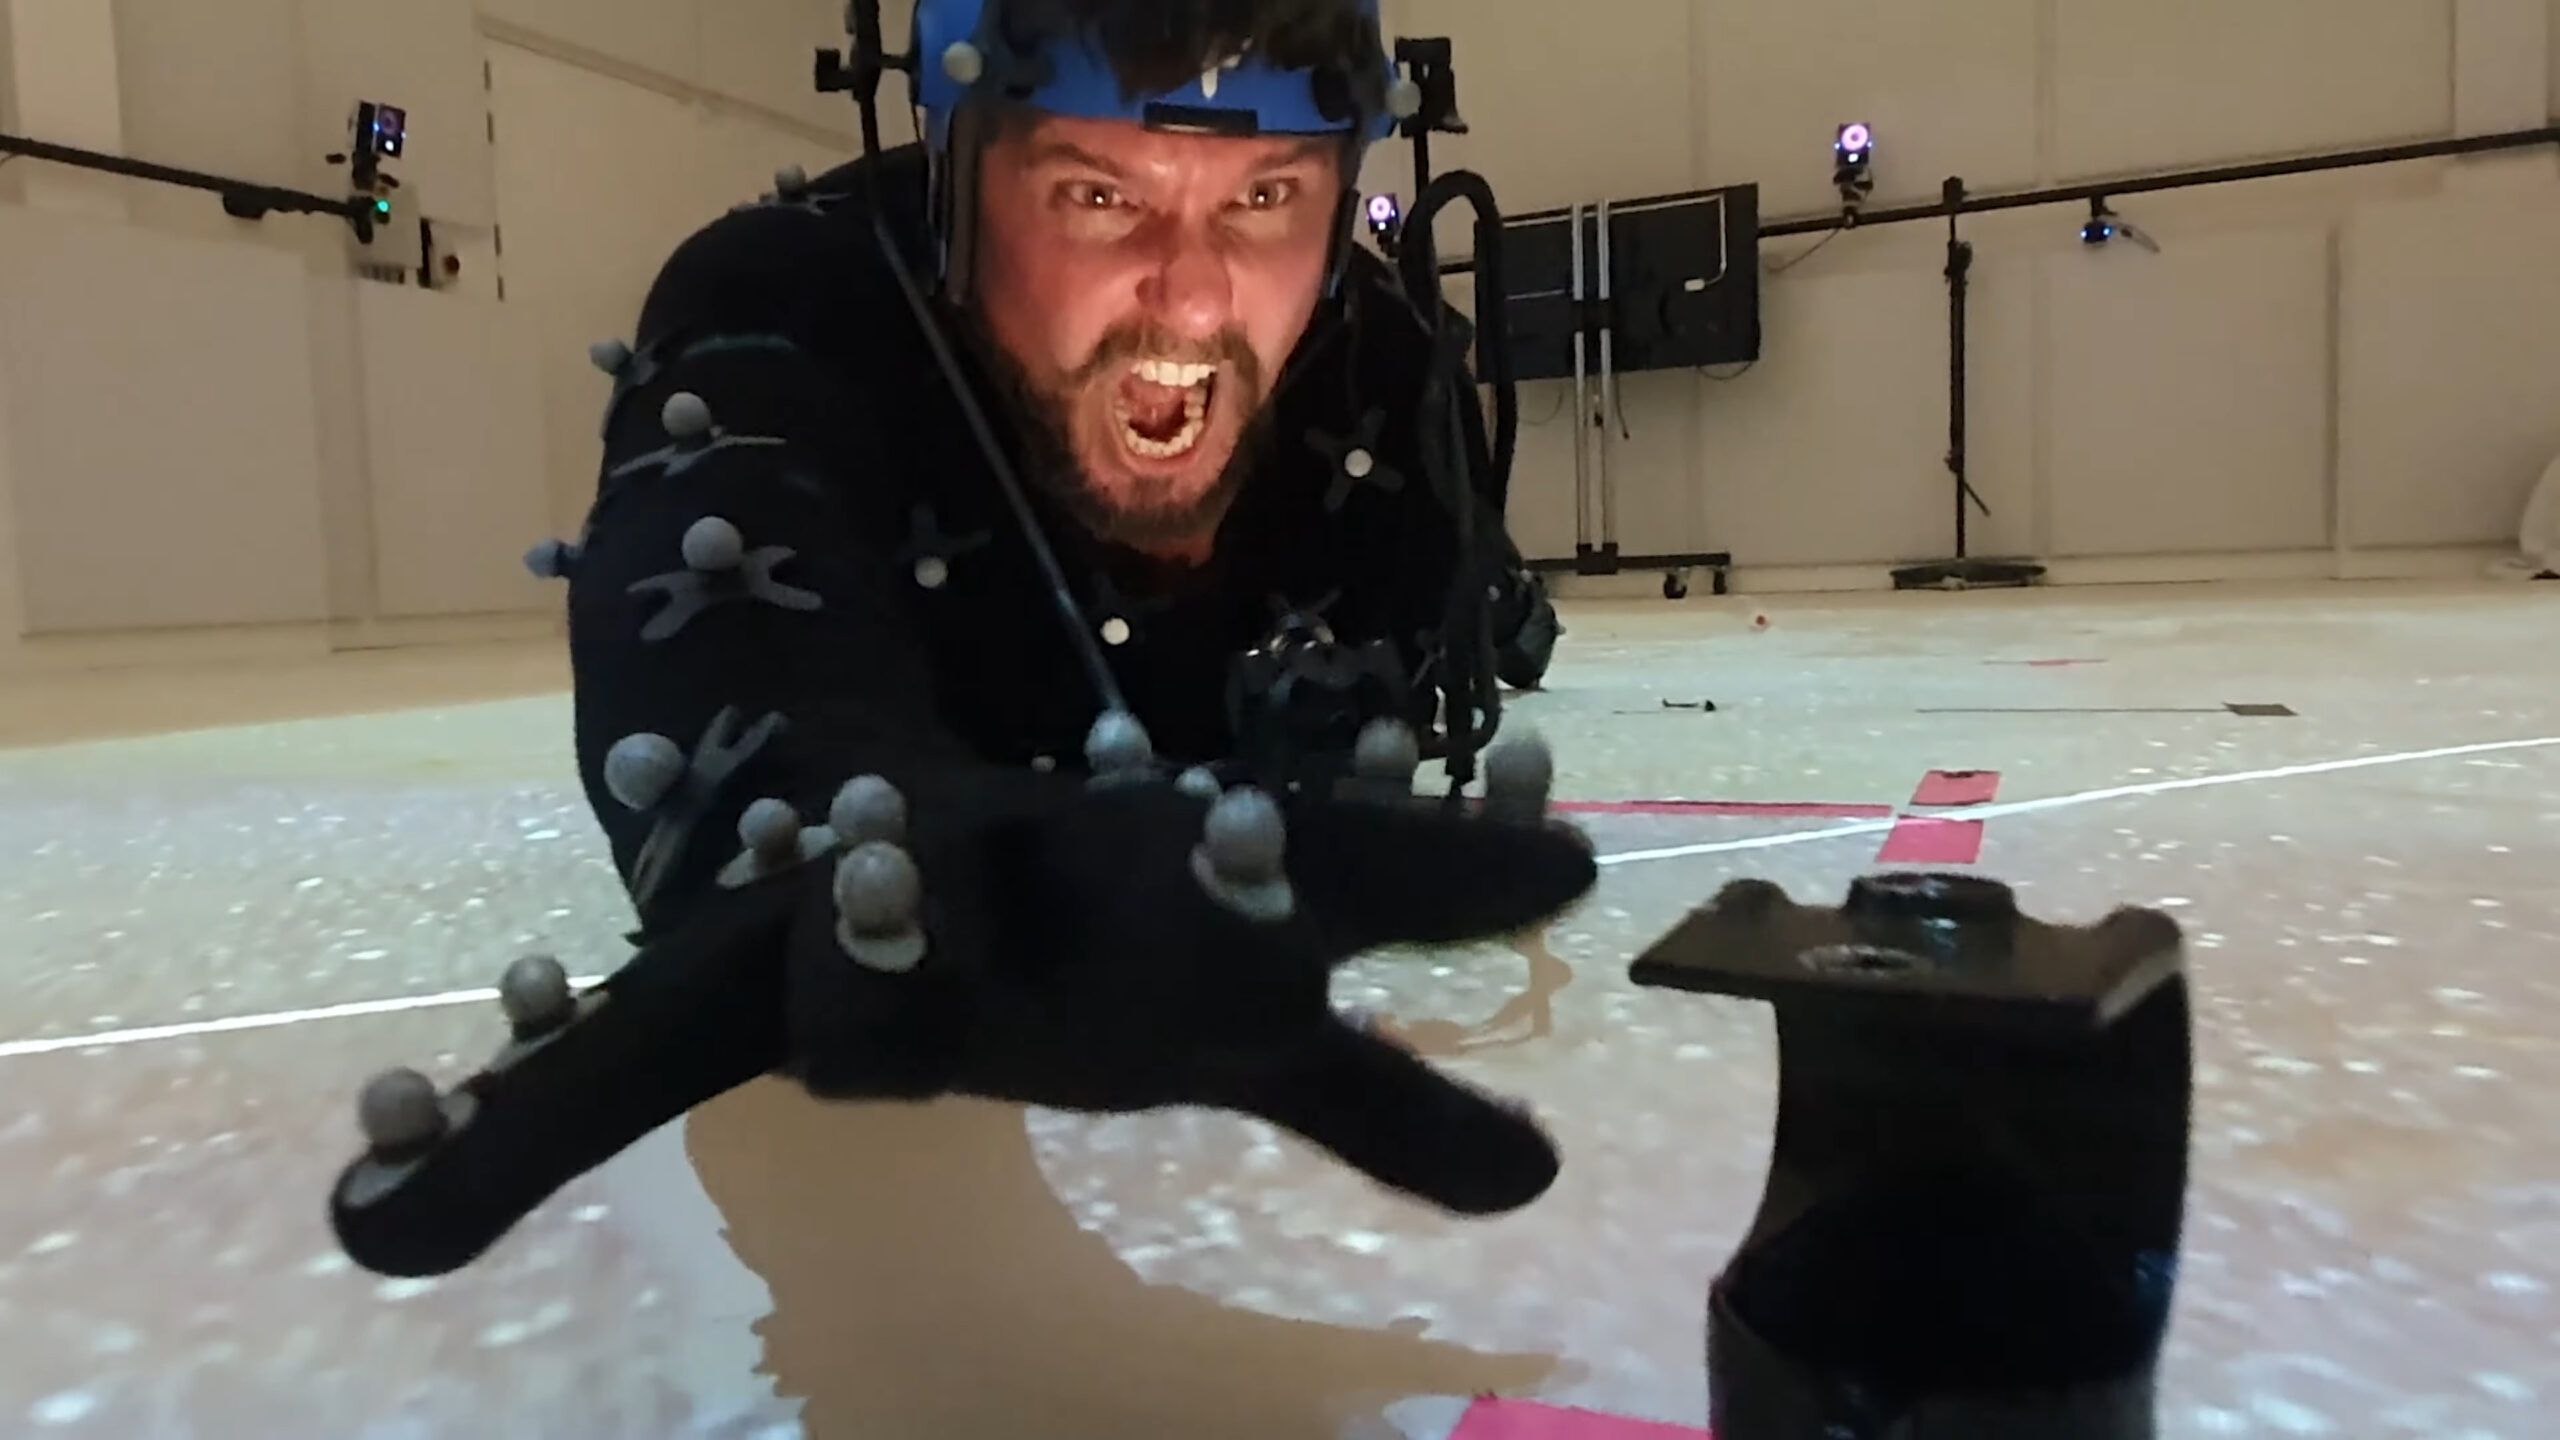 The real-time motion capture behind 'Hellblade